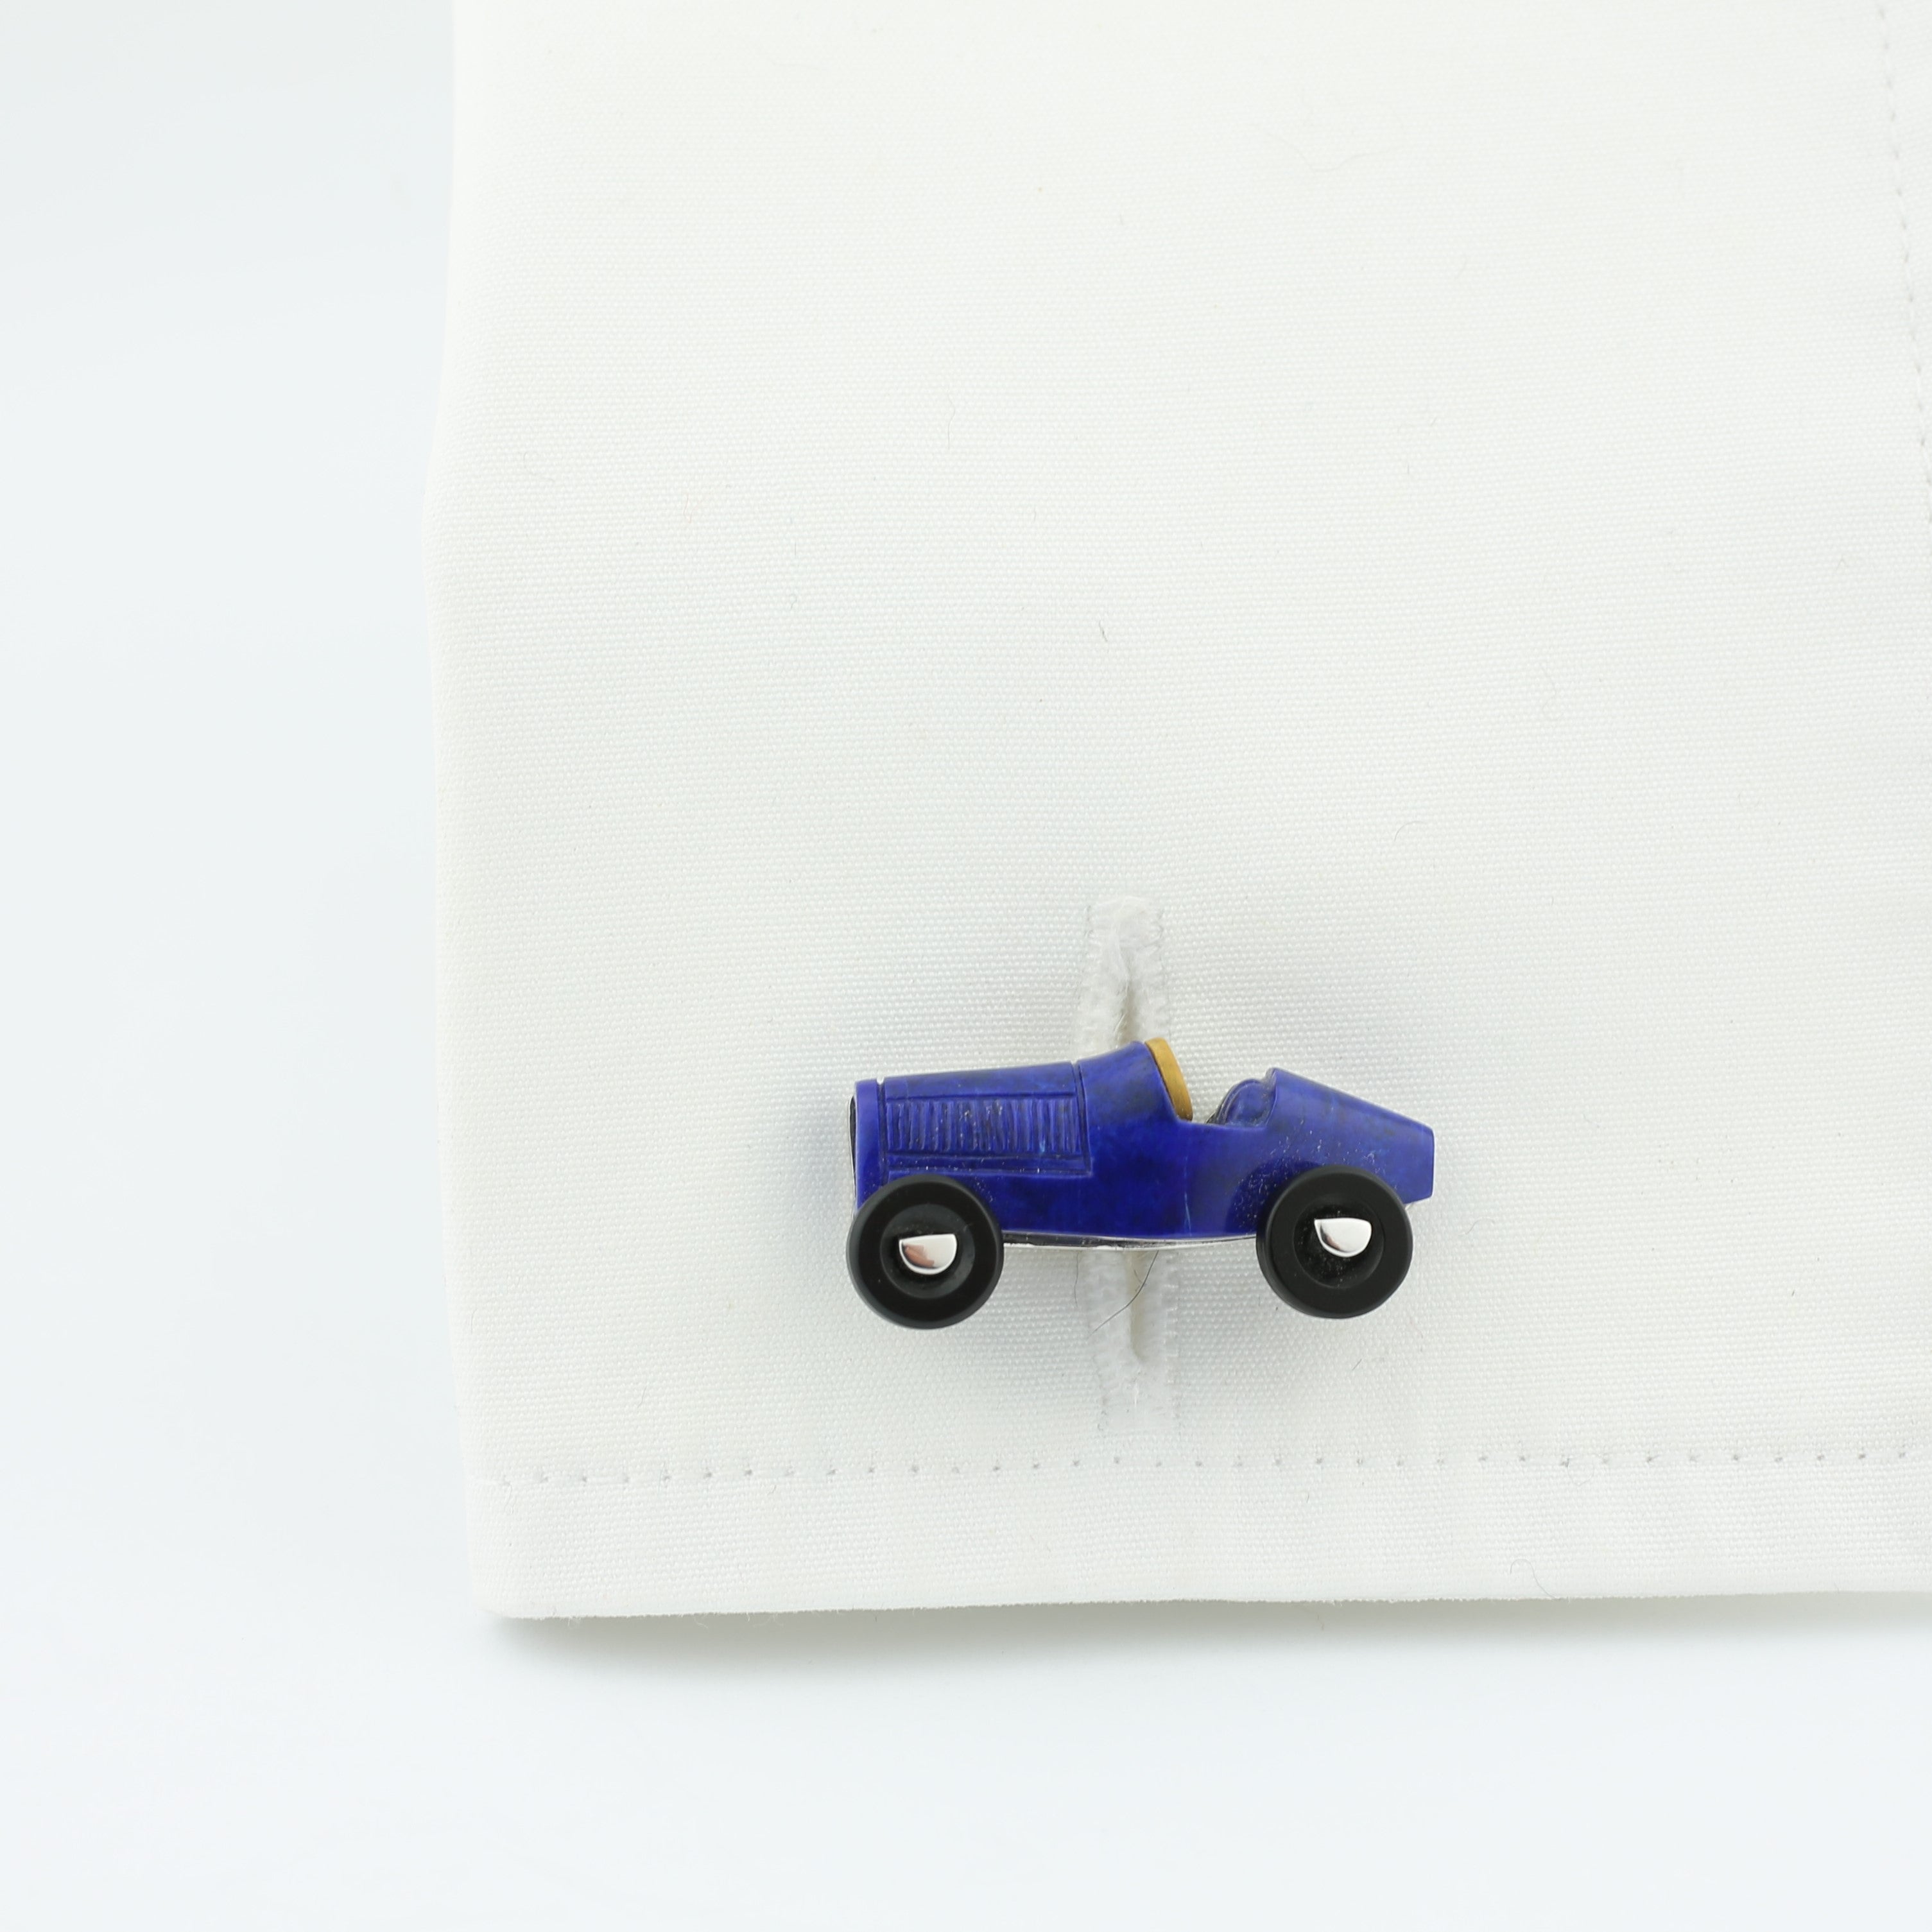 Vintage car cufflinks in lapis onyx and 18k white gold in a cuff